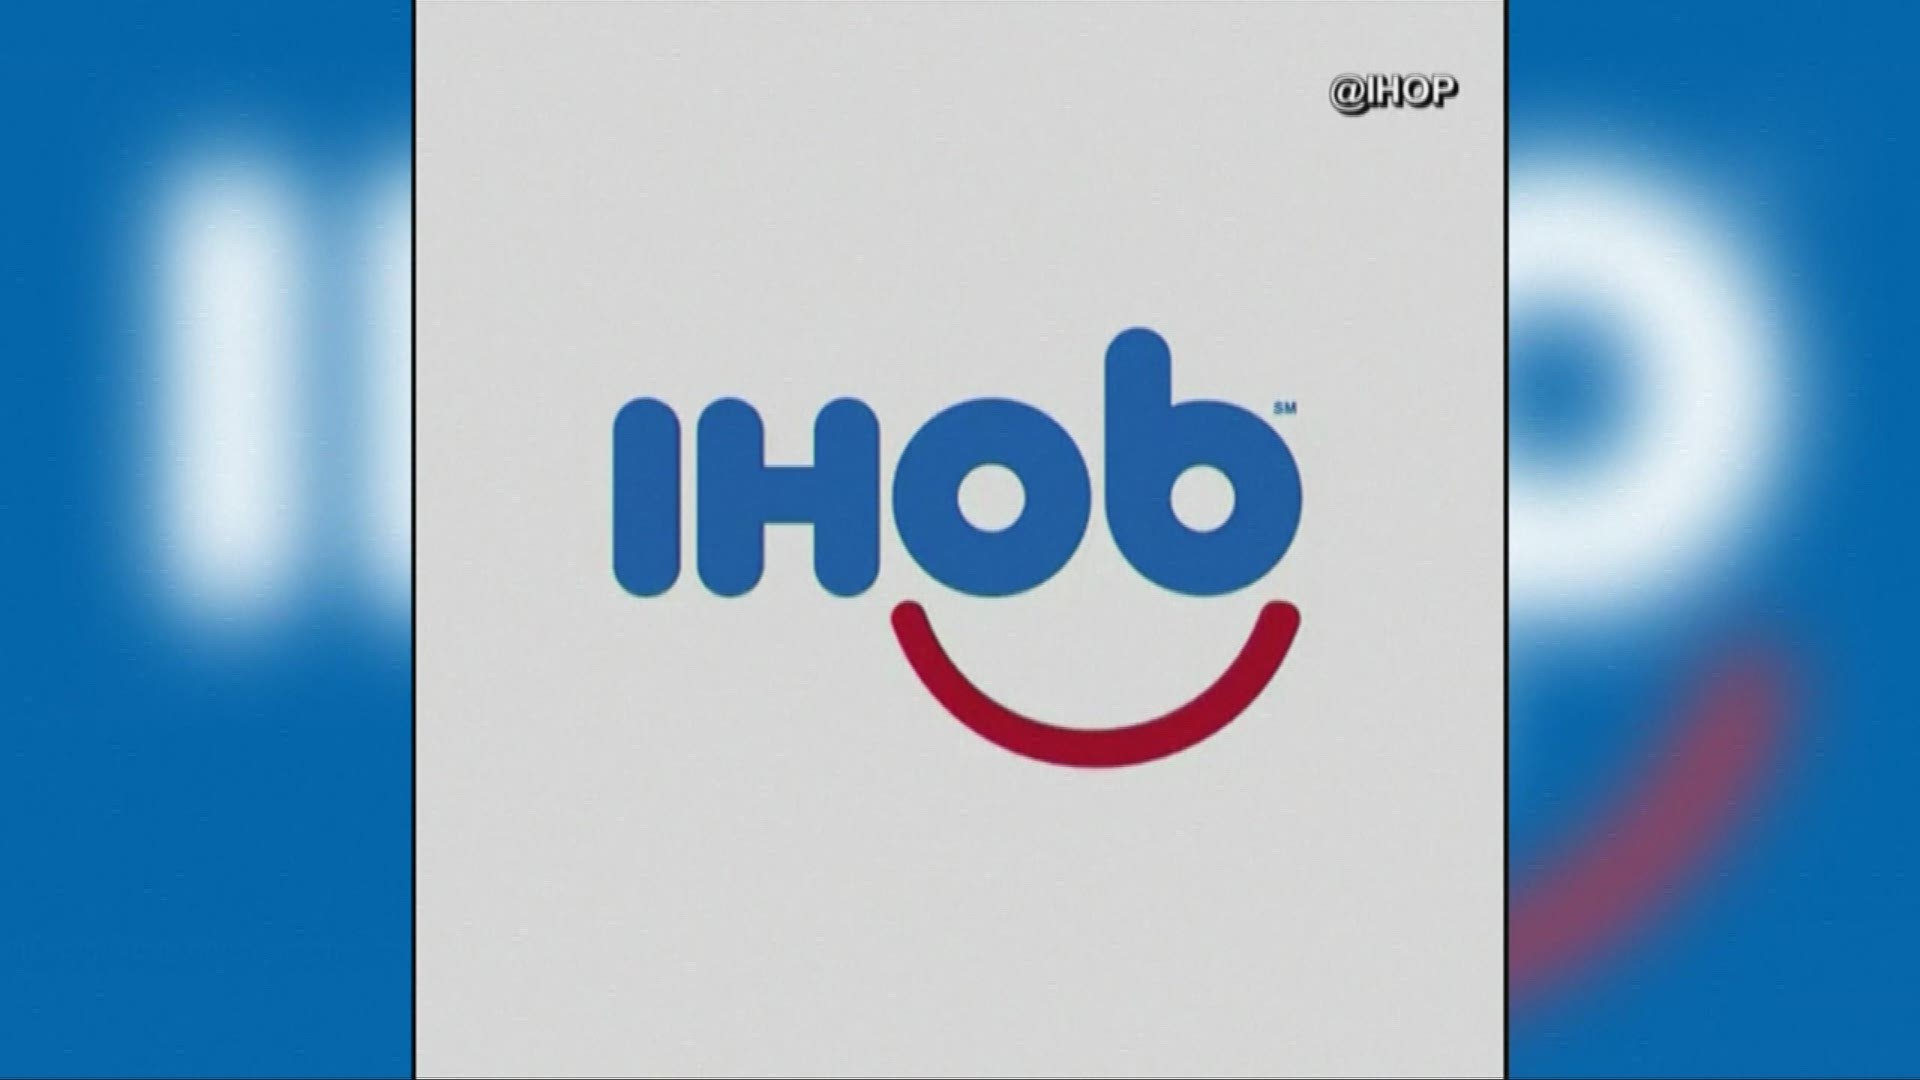 June 11, 2018: After teasing a name change, IHOP has revealed they are now known as IHOb -- the 'B' is for 'Burgers.' But it's not a permanent name swap.